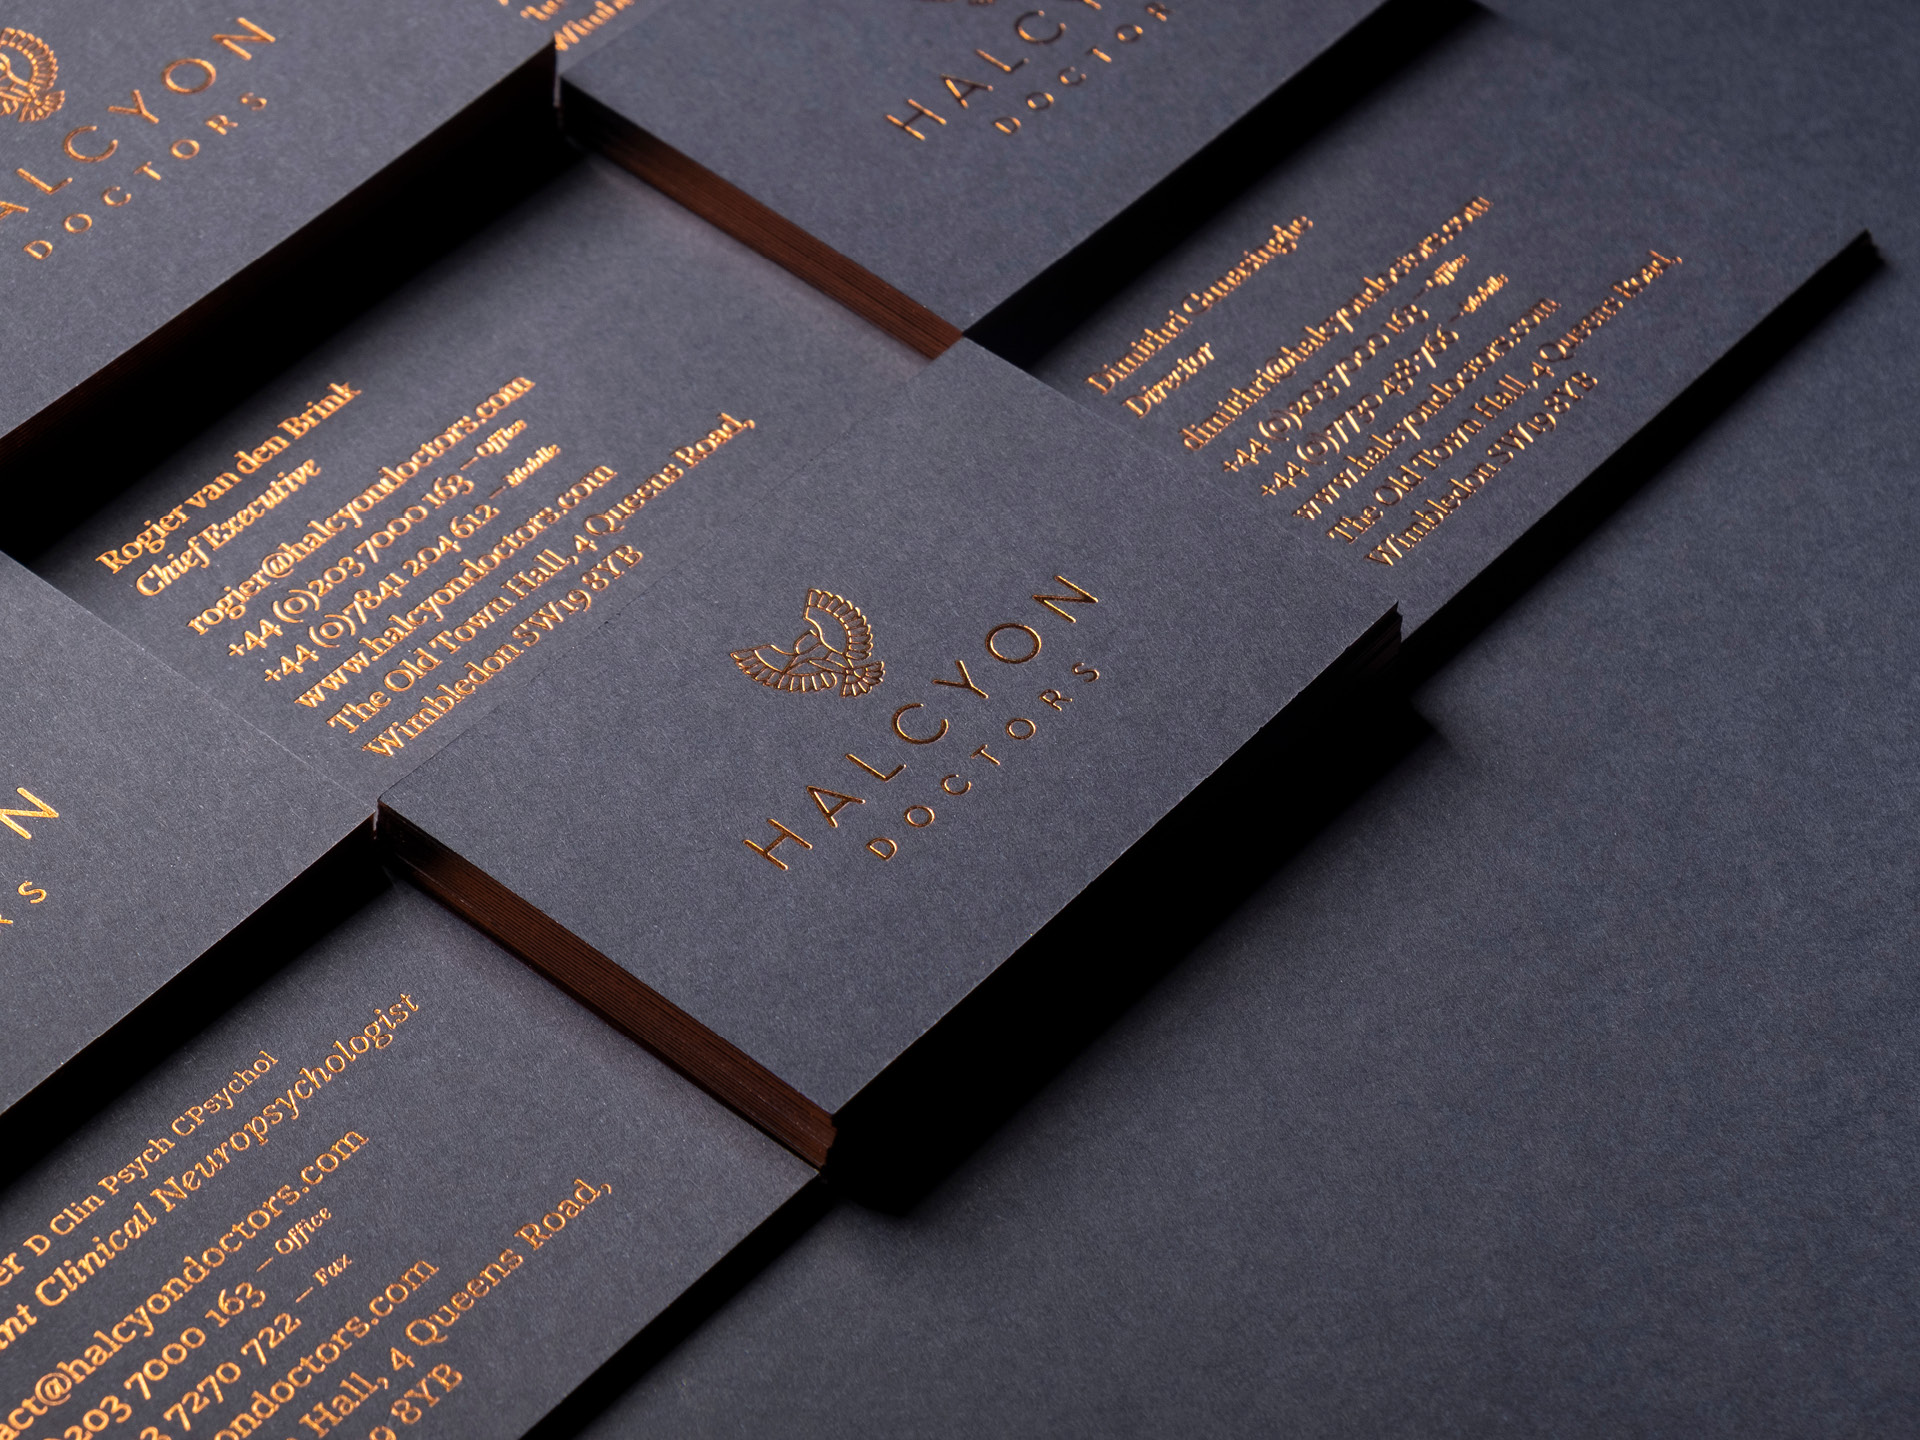 Various stacks of halcyon doctors business cards featuring the logo on one side and the contact details copper foiled on the other